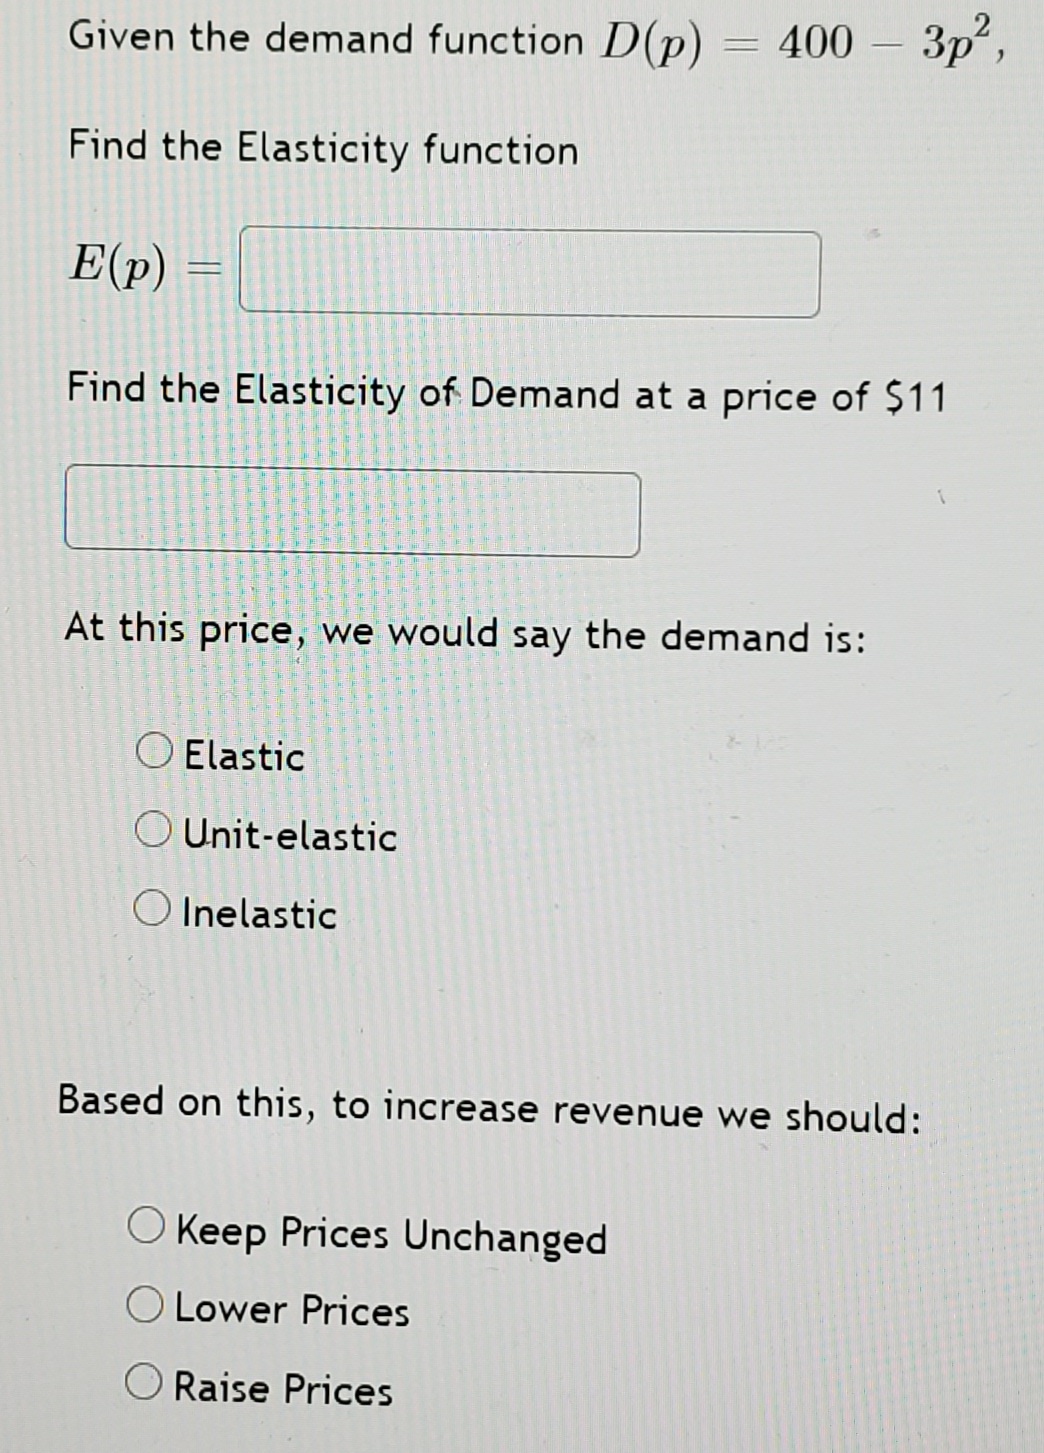 Given the demand function D(p)
400- Зр?,
Find the Elasticity function
E(p)
Find the Elasticity of Demand at a price of $11
At this price, we would say the demand is:
O Elastic
O Unit-elastic
O Inelastic
Based on this, to increase revenue we should:
O Keep Prices Unchanged
O Lower Prices
O Raise Prices
